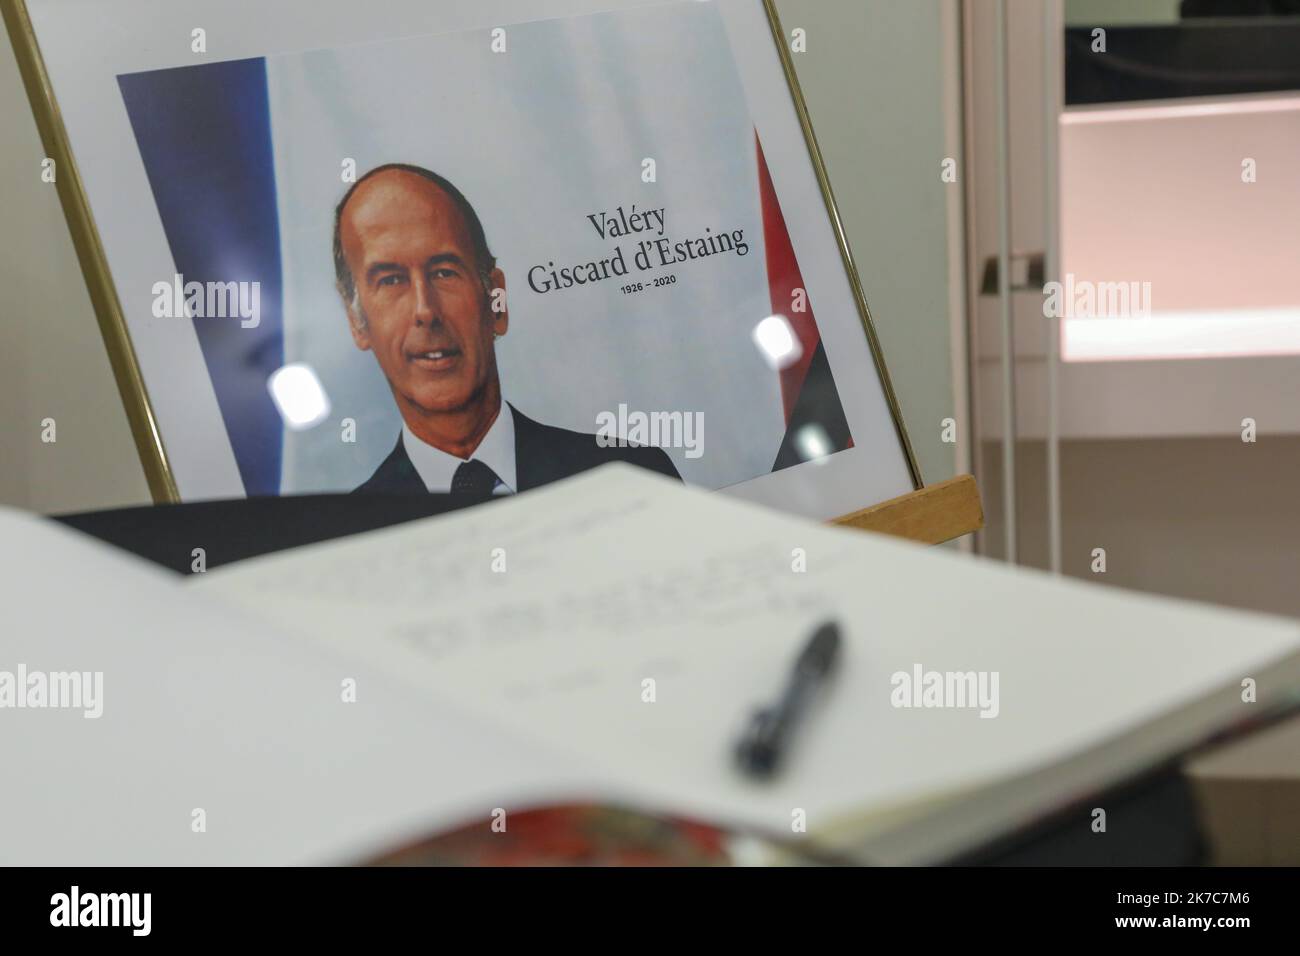 ©PHOTOPQR/VOIX DU NORD/Thierry THOREL ; 09/12/2020 ; LIVRE D'OR - un livre d'or a ete mis en place au seinde la mairie , pour rendre hommage a Valery Giscard d'Estaing - Le 9 decembre 2020 - A Roubaix - France, dec 9th 2020 Musee d'Orsay : books of condolence for the late former president for this national day of mourning. No official ceremony and funeral in small county  Stock Photo